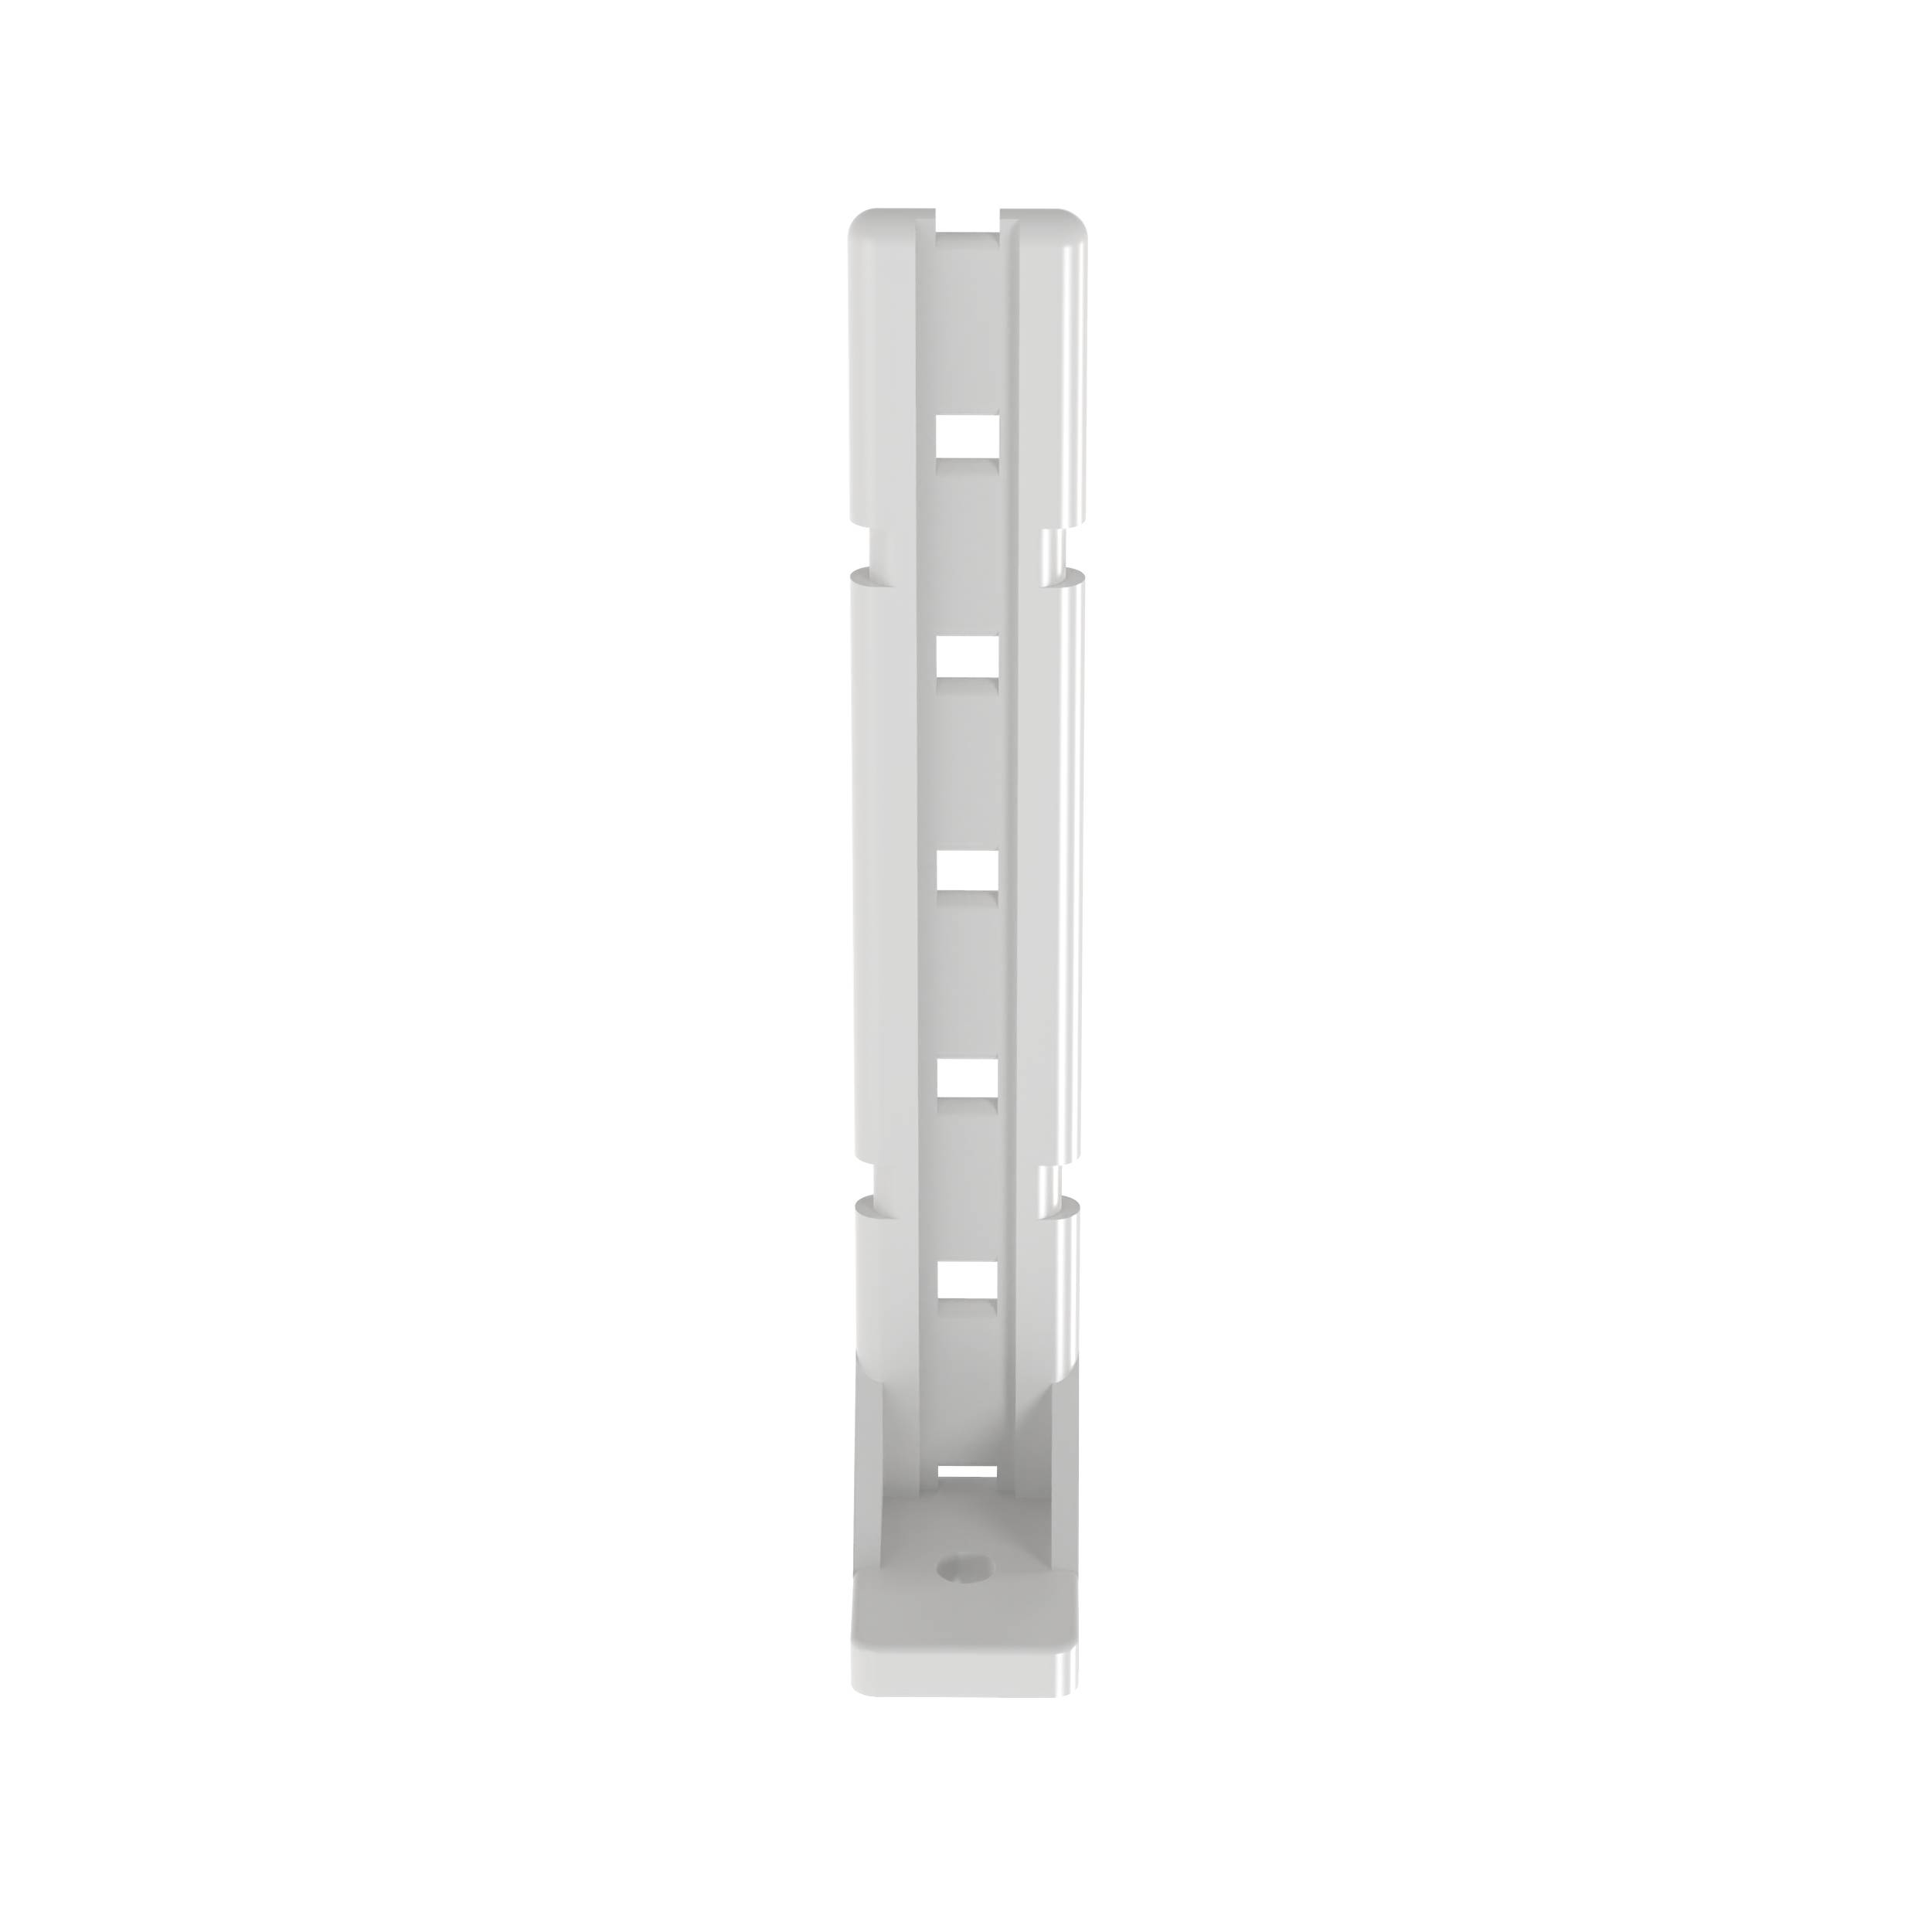 Panduit® Pan-Post™ PP2S-S12-X Cable Tie Mount, Threaded Mount, 0.188 in W Tie, Nylon 6.6/Polyamide, Natural